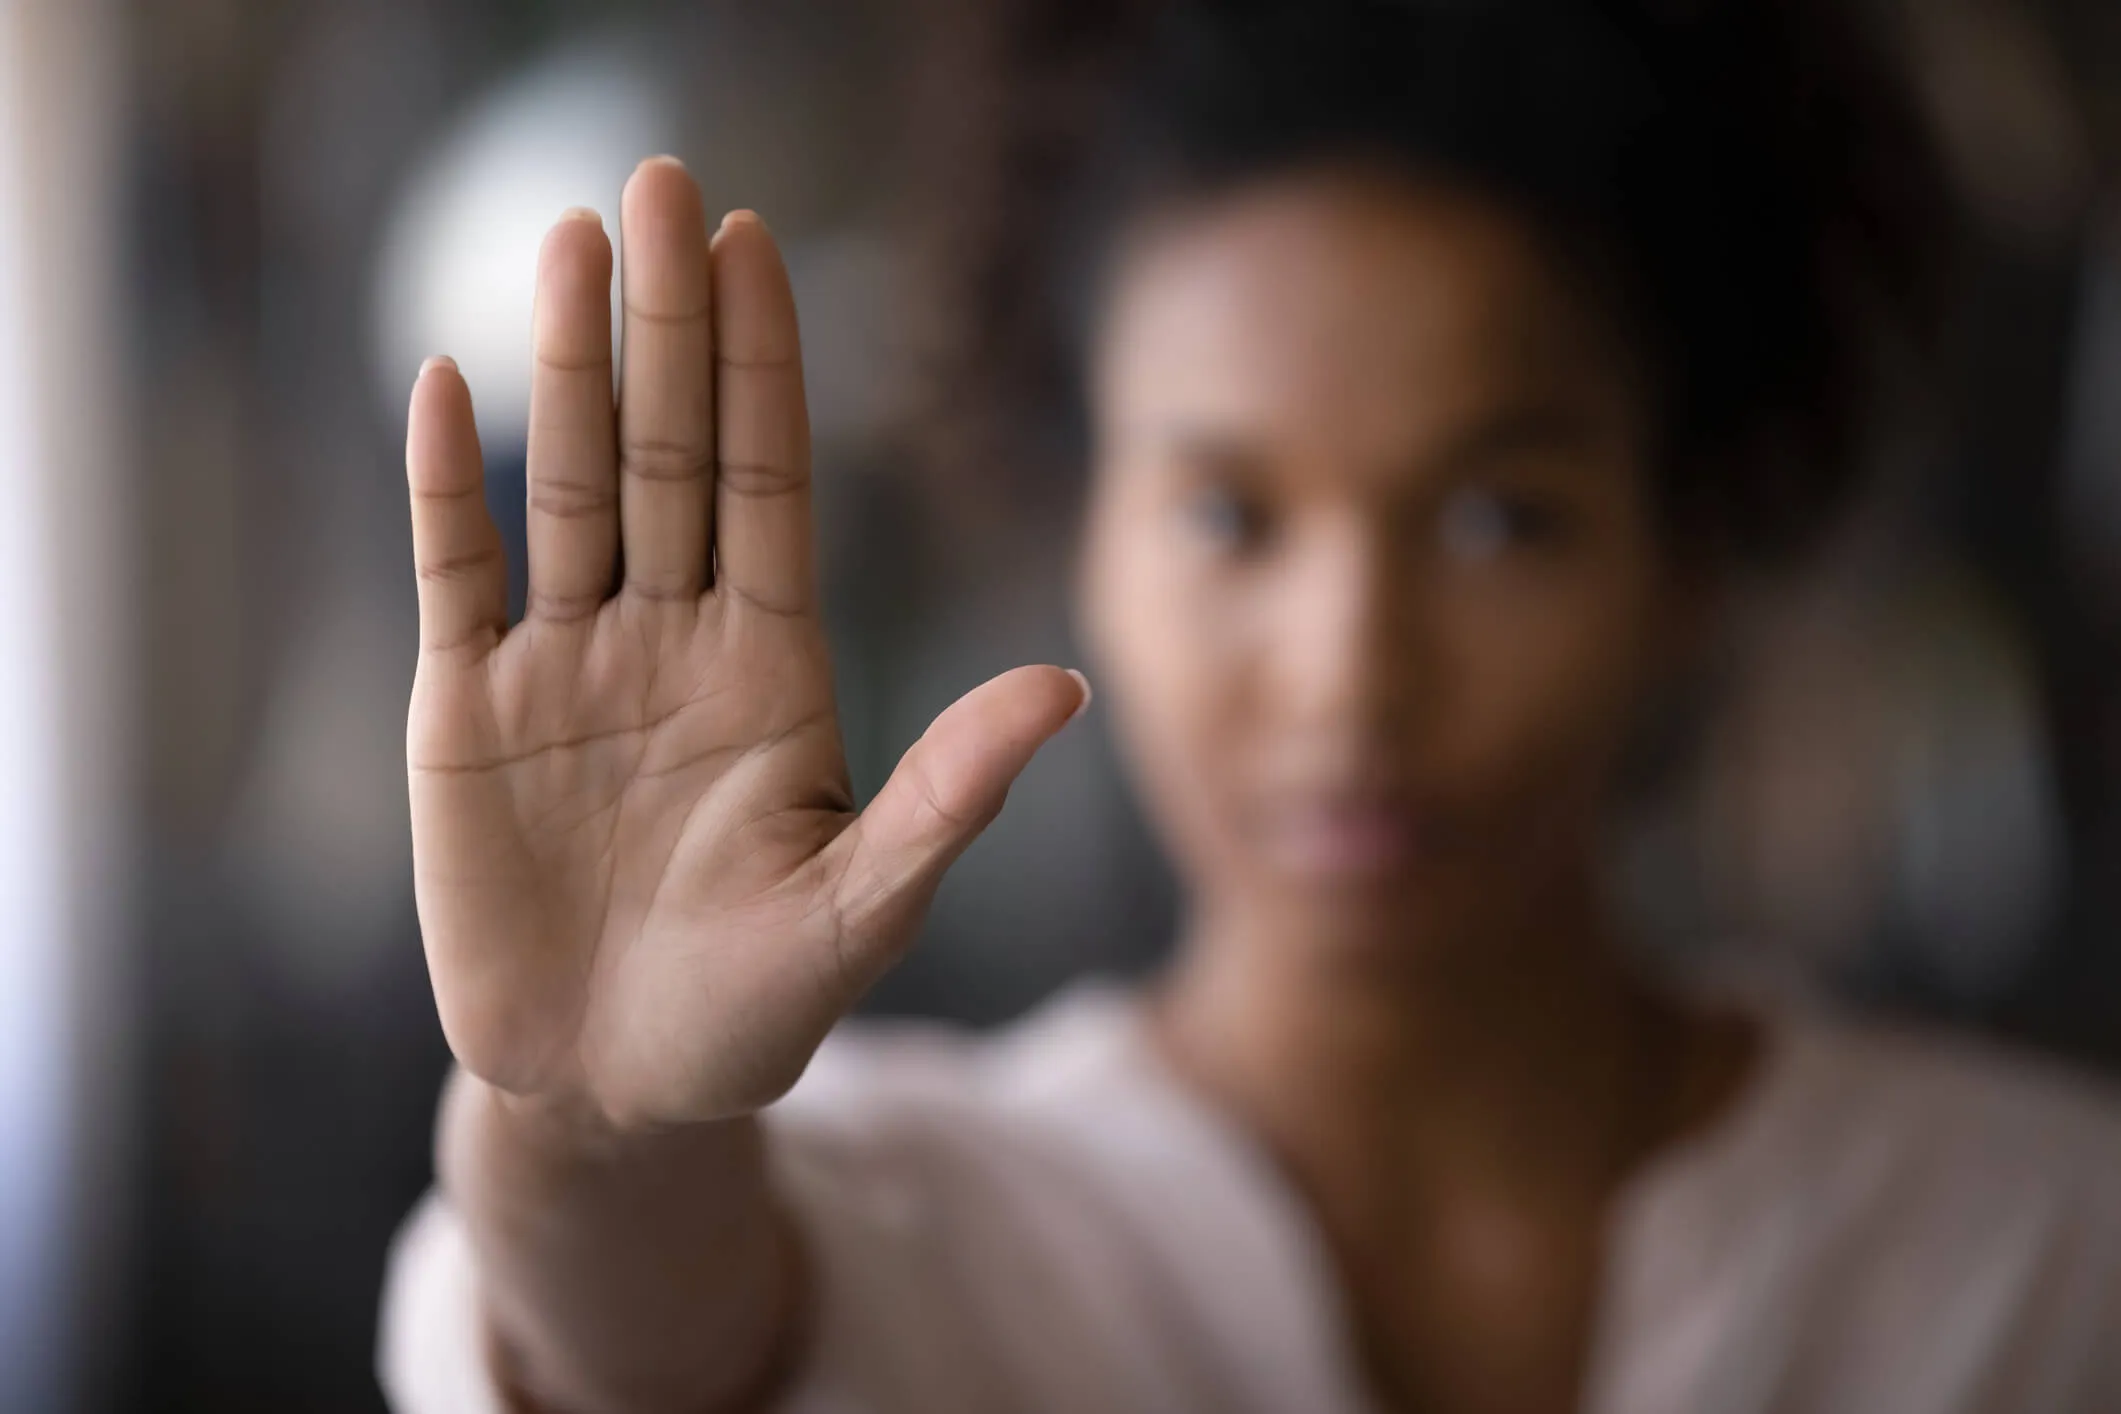 A woman holding up her hand to imply "stop".